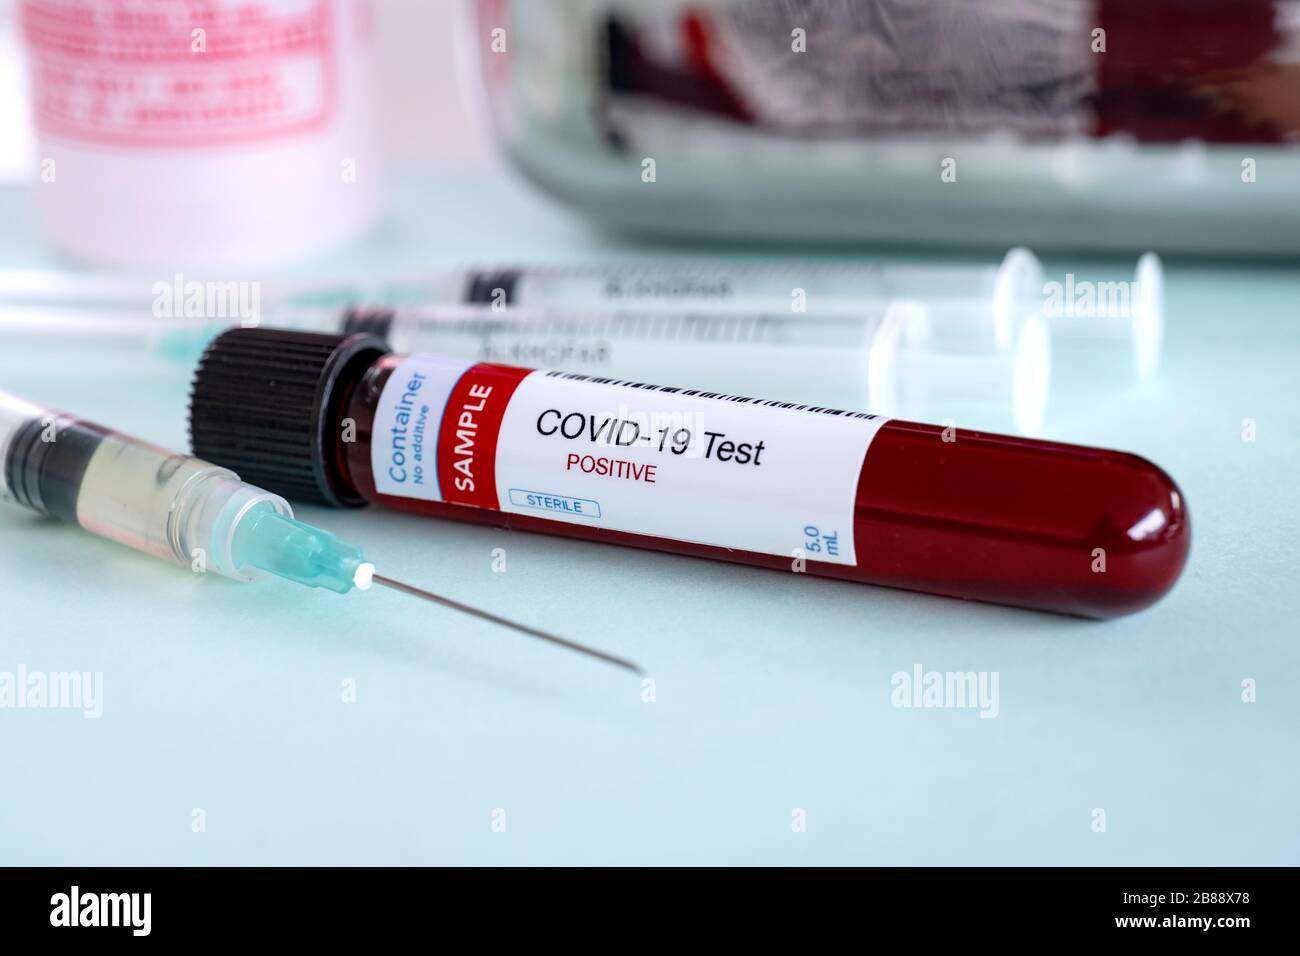 Testing for presence of coronavirus. Syringe with vaccine and tube containing a blood sample that has tested positive for Stock Photo